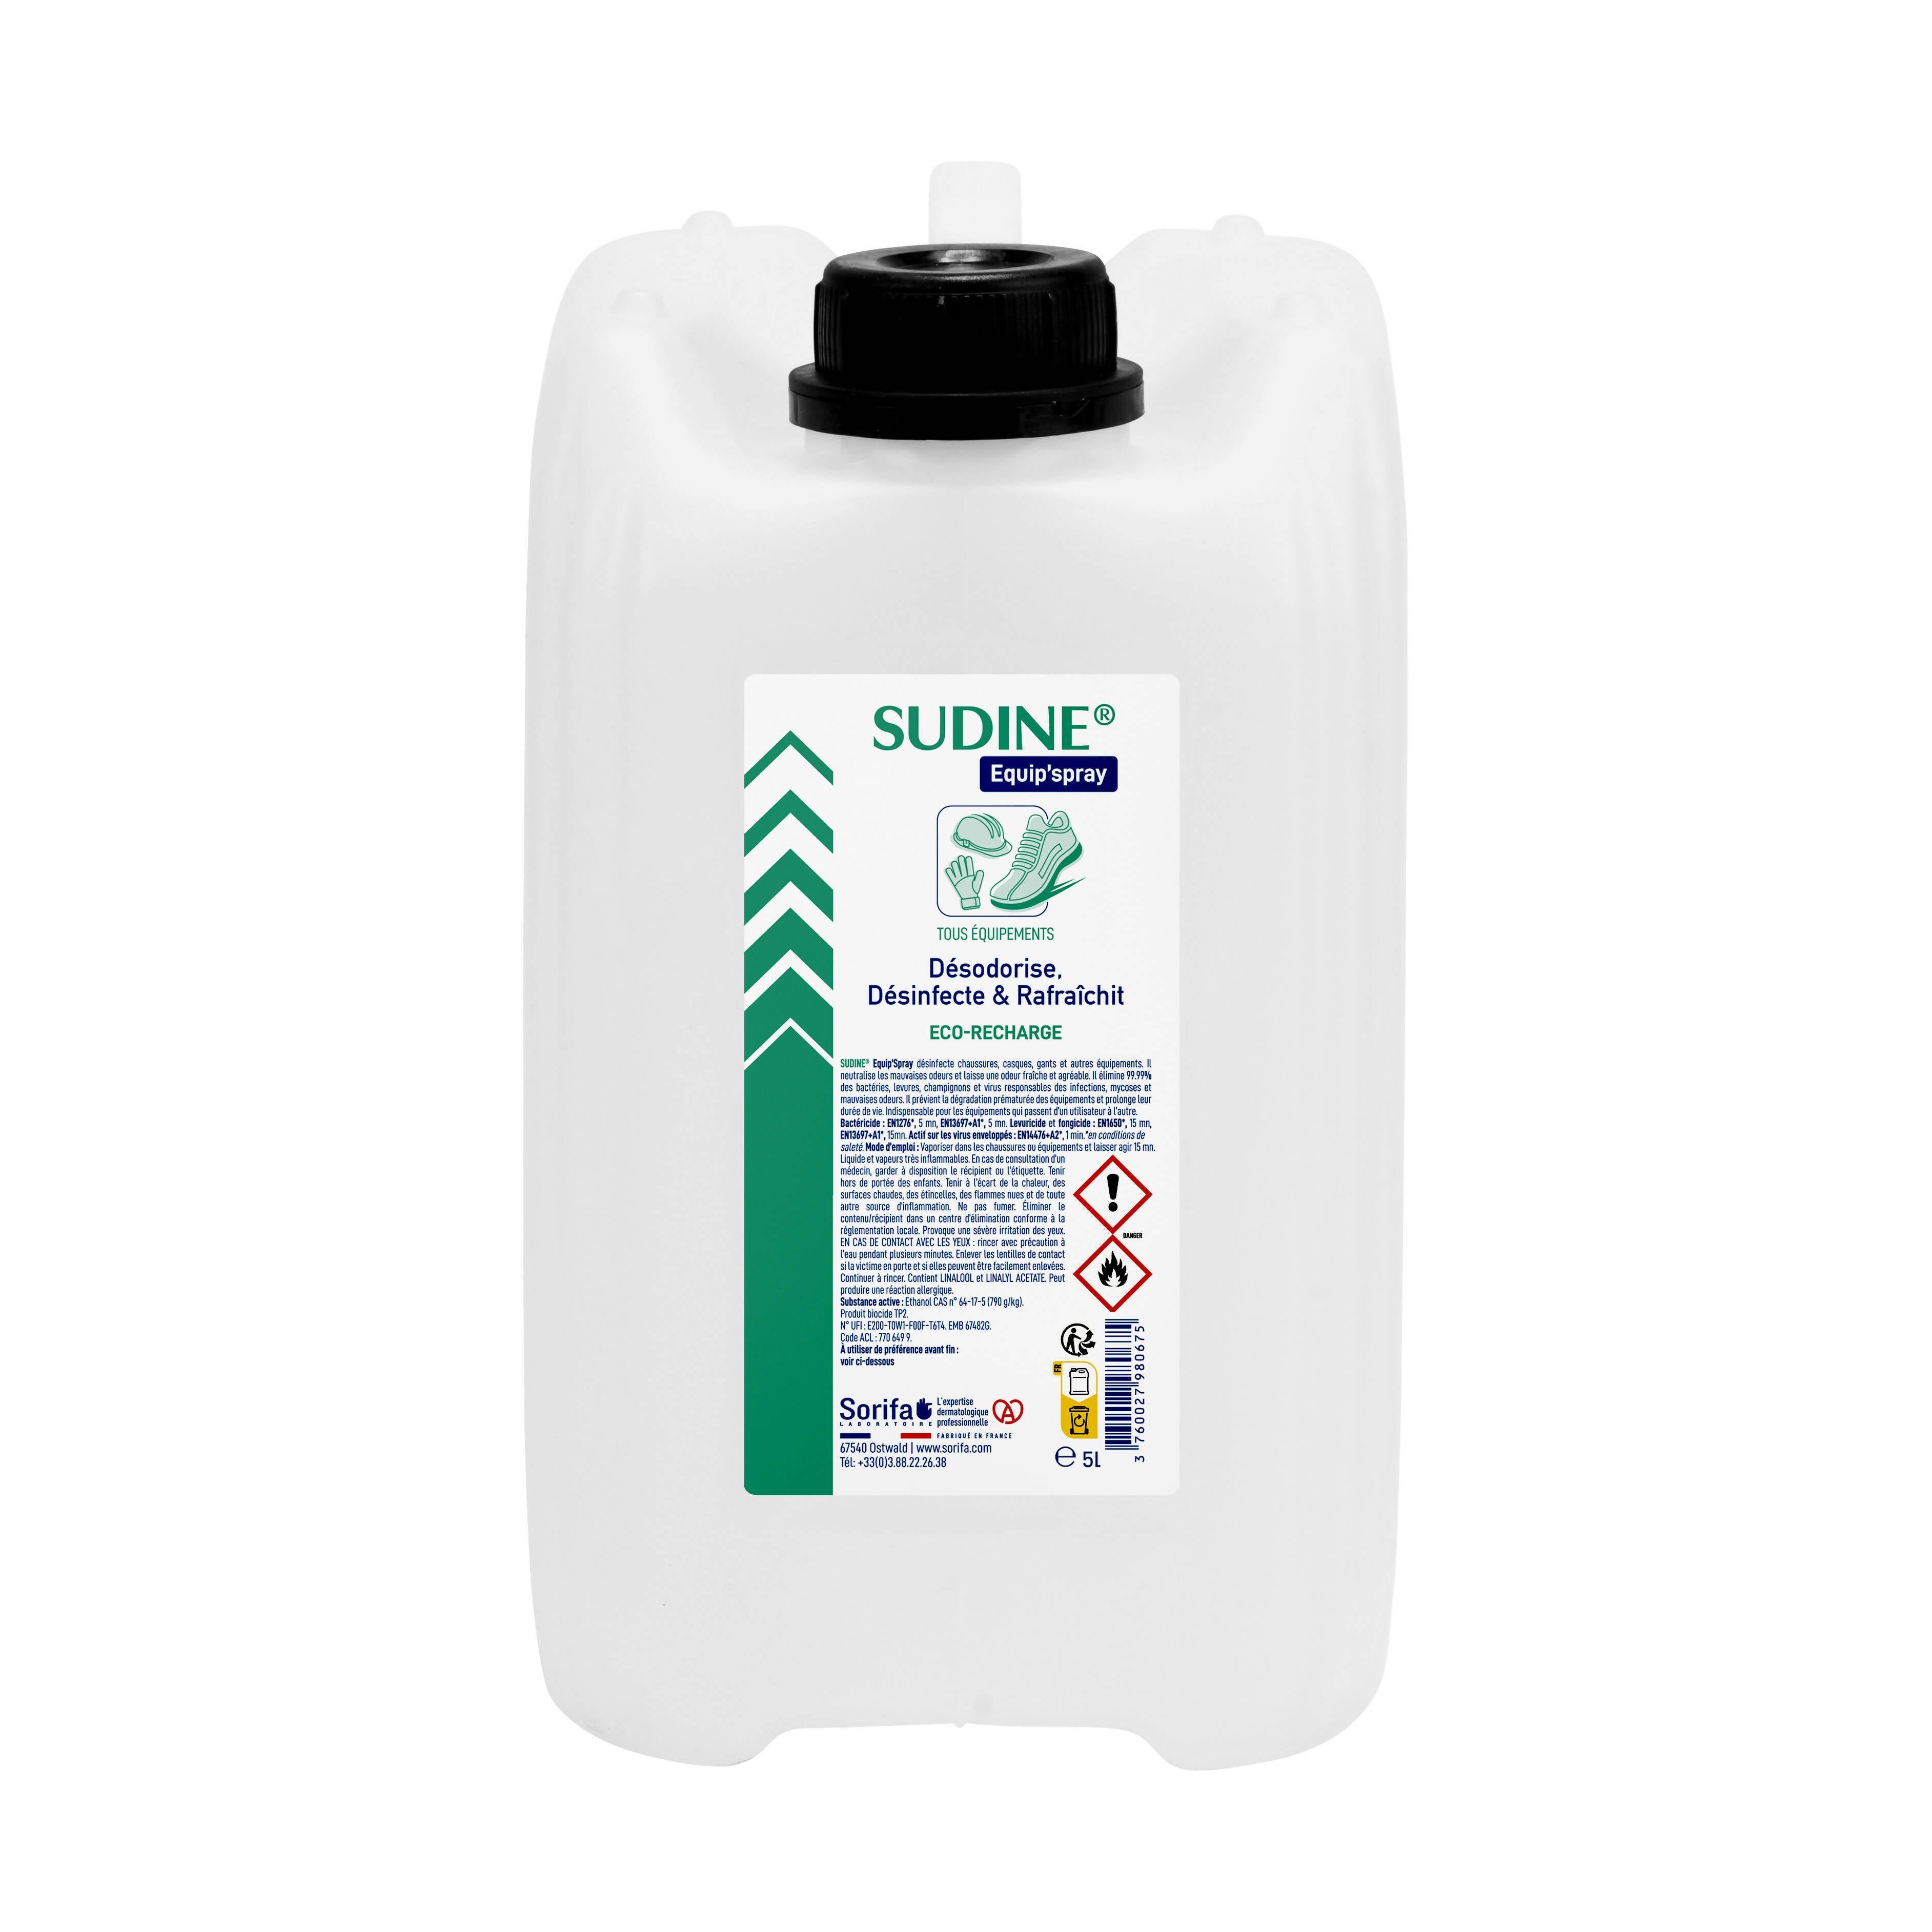 SORIFA - Complete box of 4 - Sudine Equip'spray - Deodorizes, disinfects, refreshes - Shoes, helmets, gloves, equipment - 5L refill for SUDINE Equip'spray 50 and 125 ml or for the 1L SORIFA Spray - 0